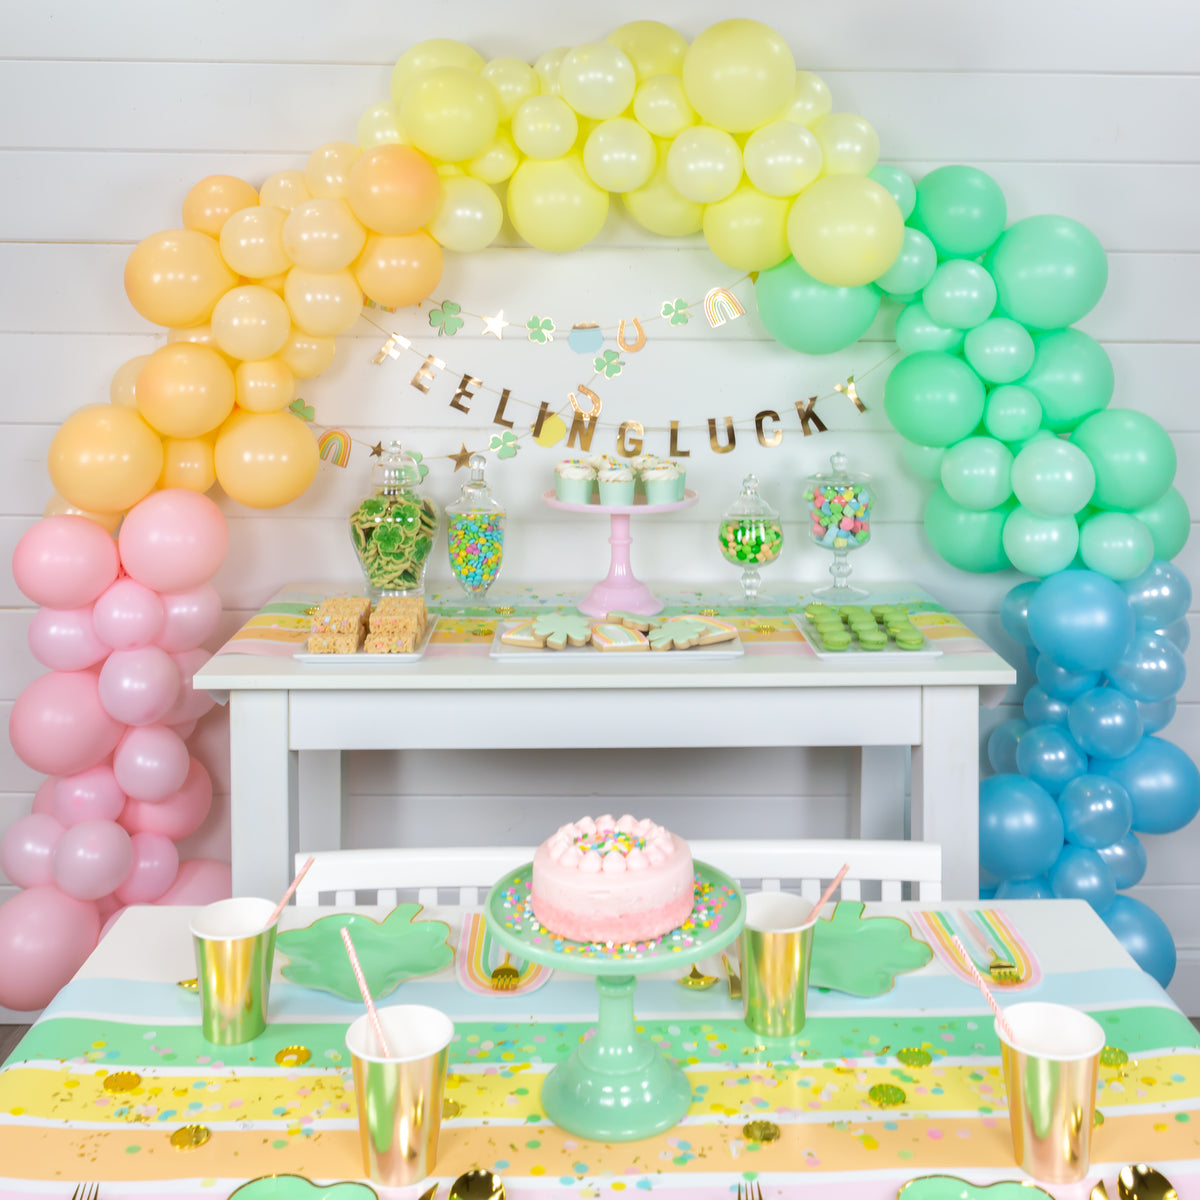 Assembled Happy Birthday Banner with Colorful Hanging Paper Fans for Pastel  Rainbow Party Decorations